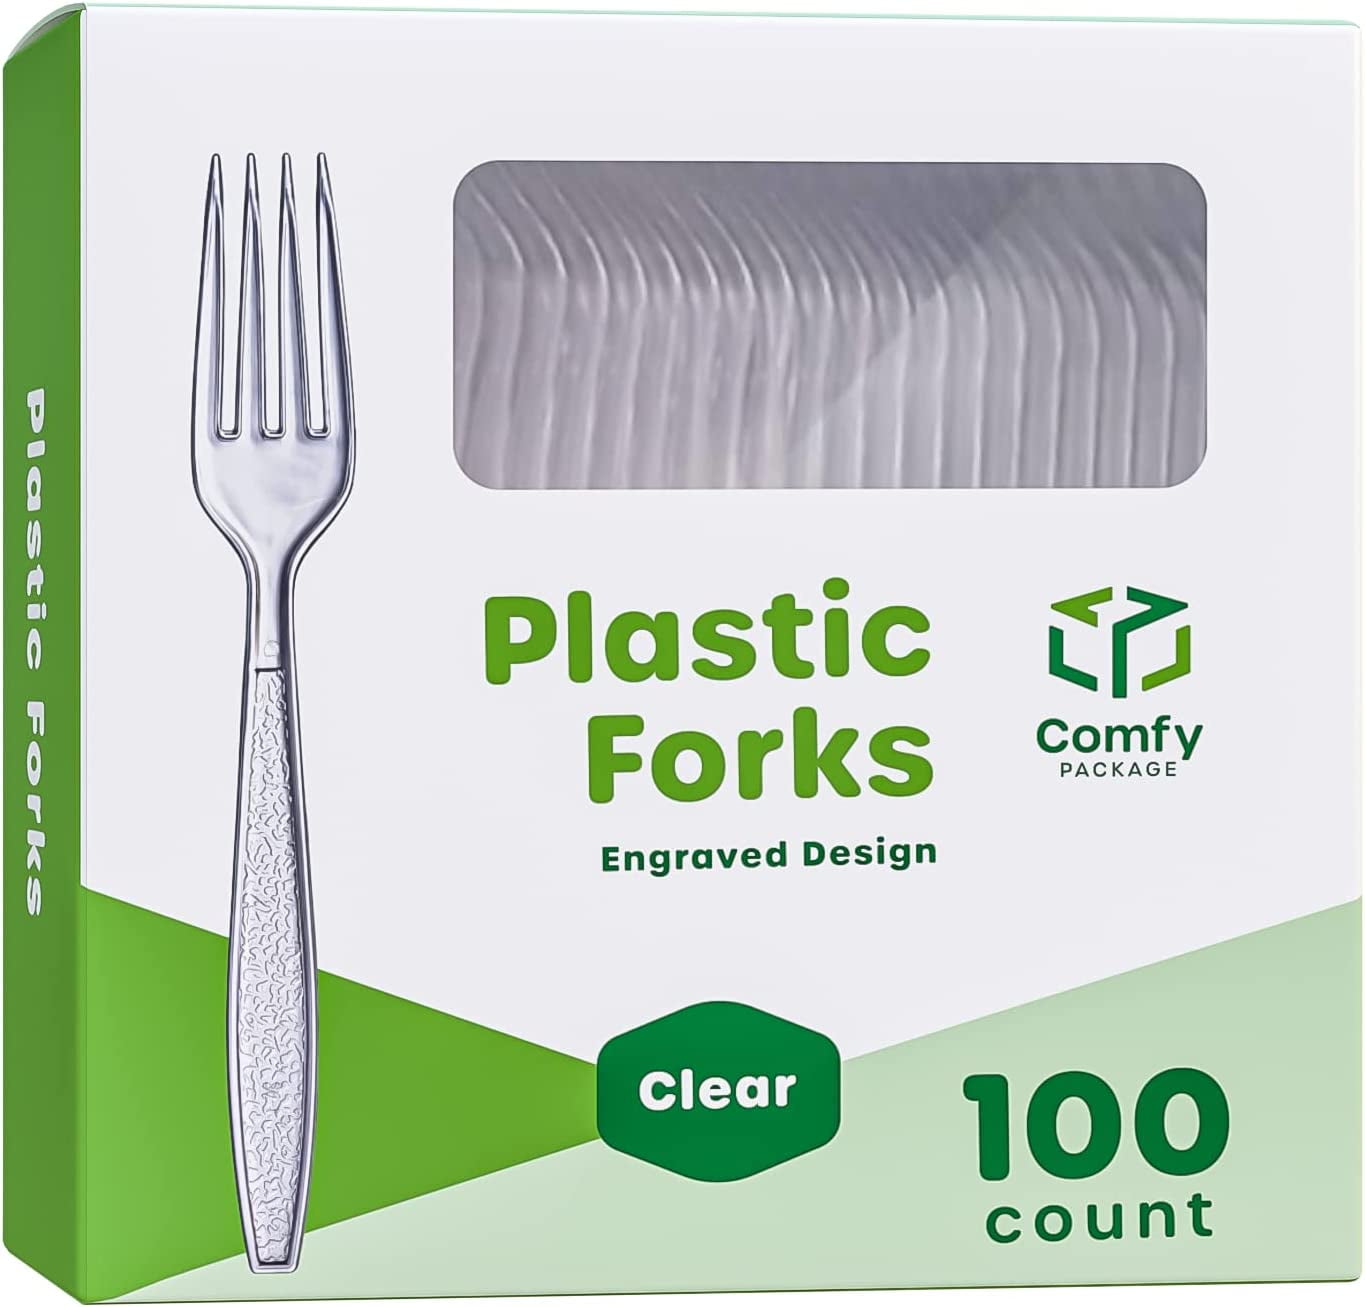 Advantages of Using Disposable Cutlery